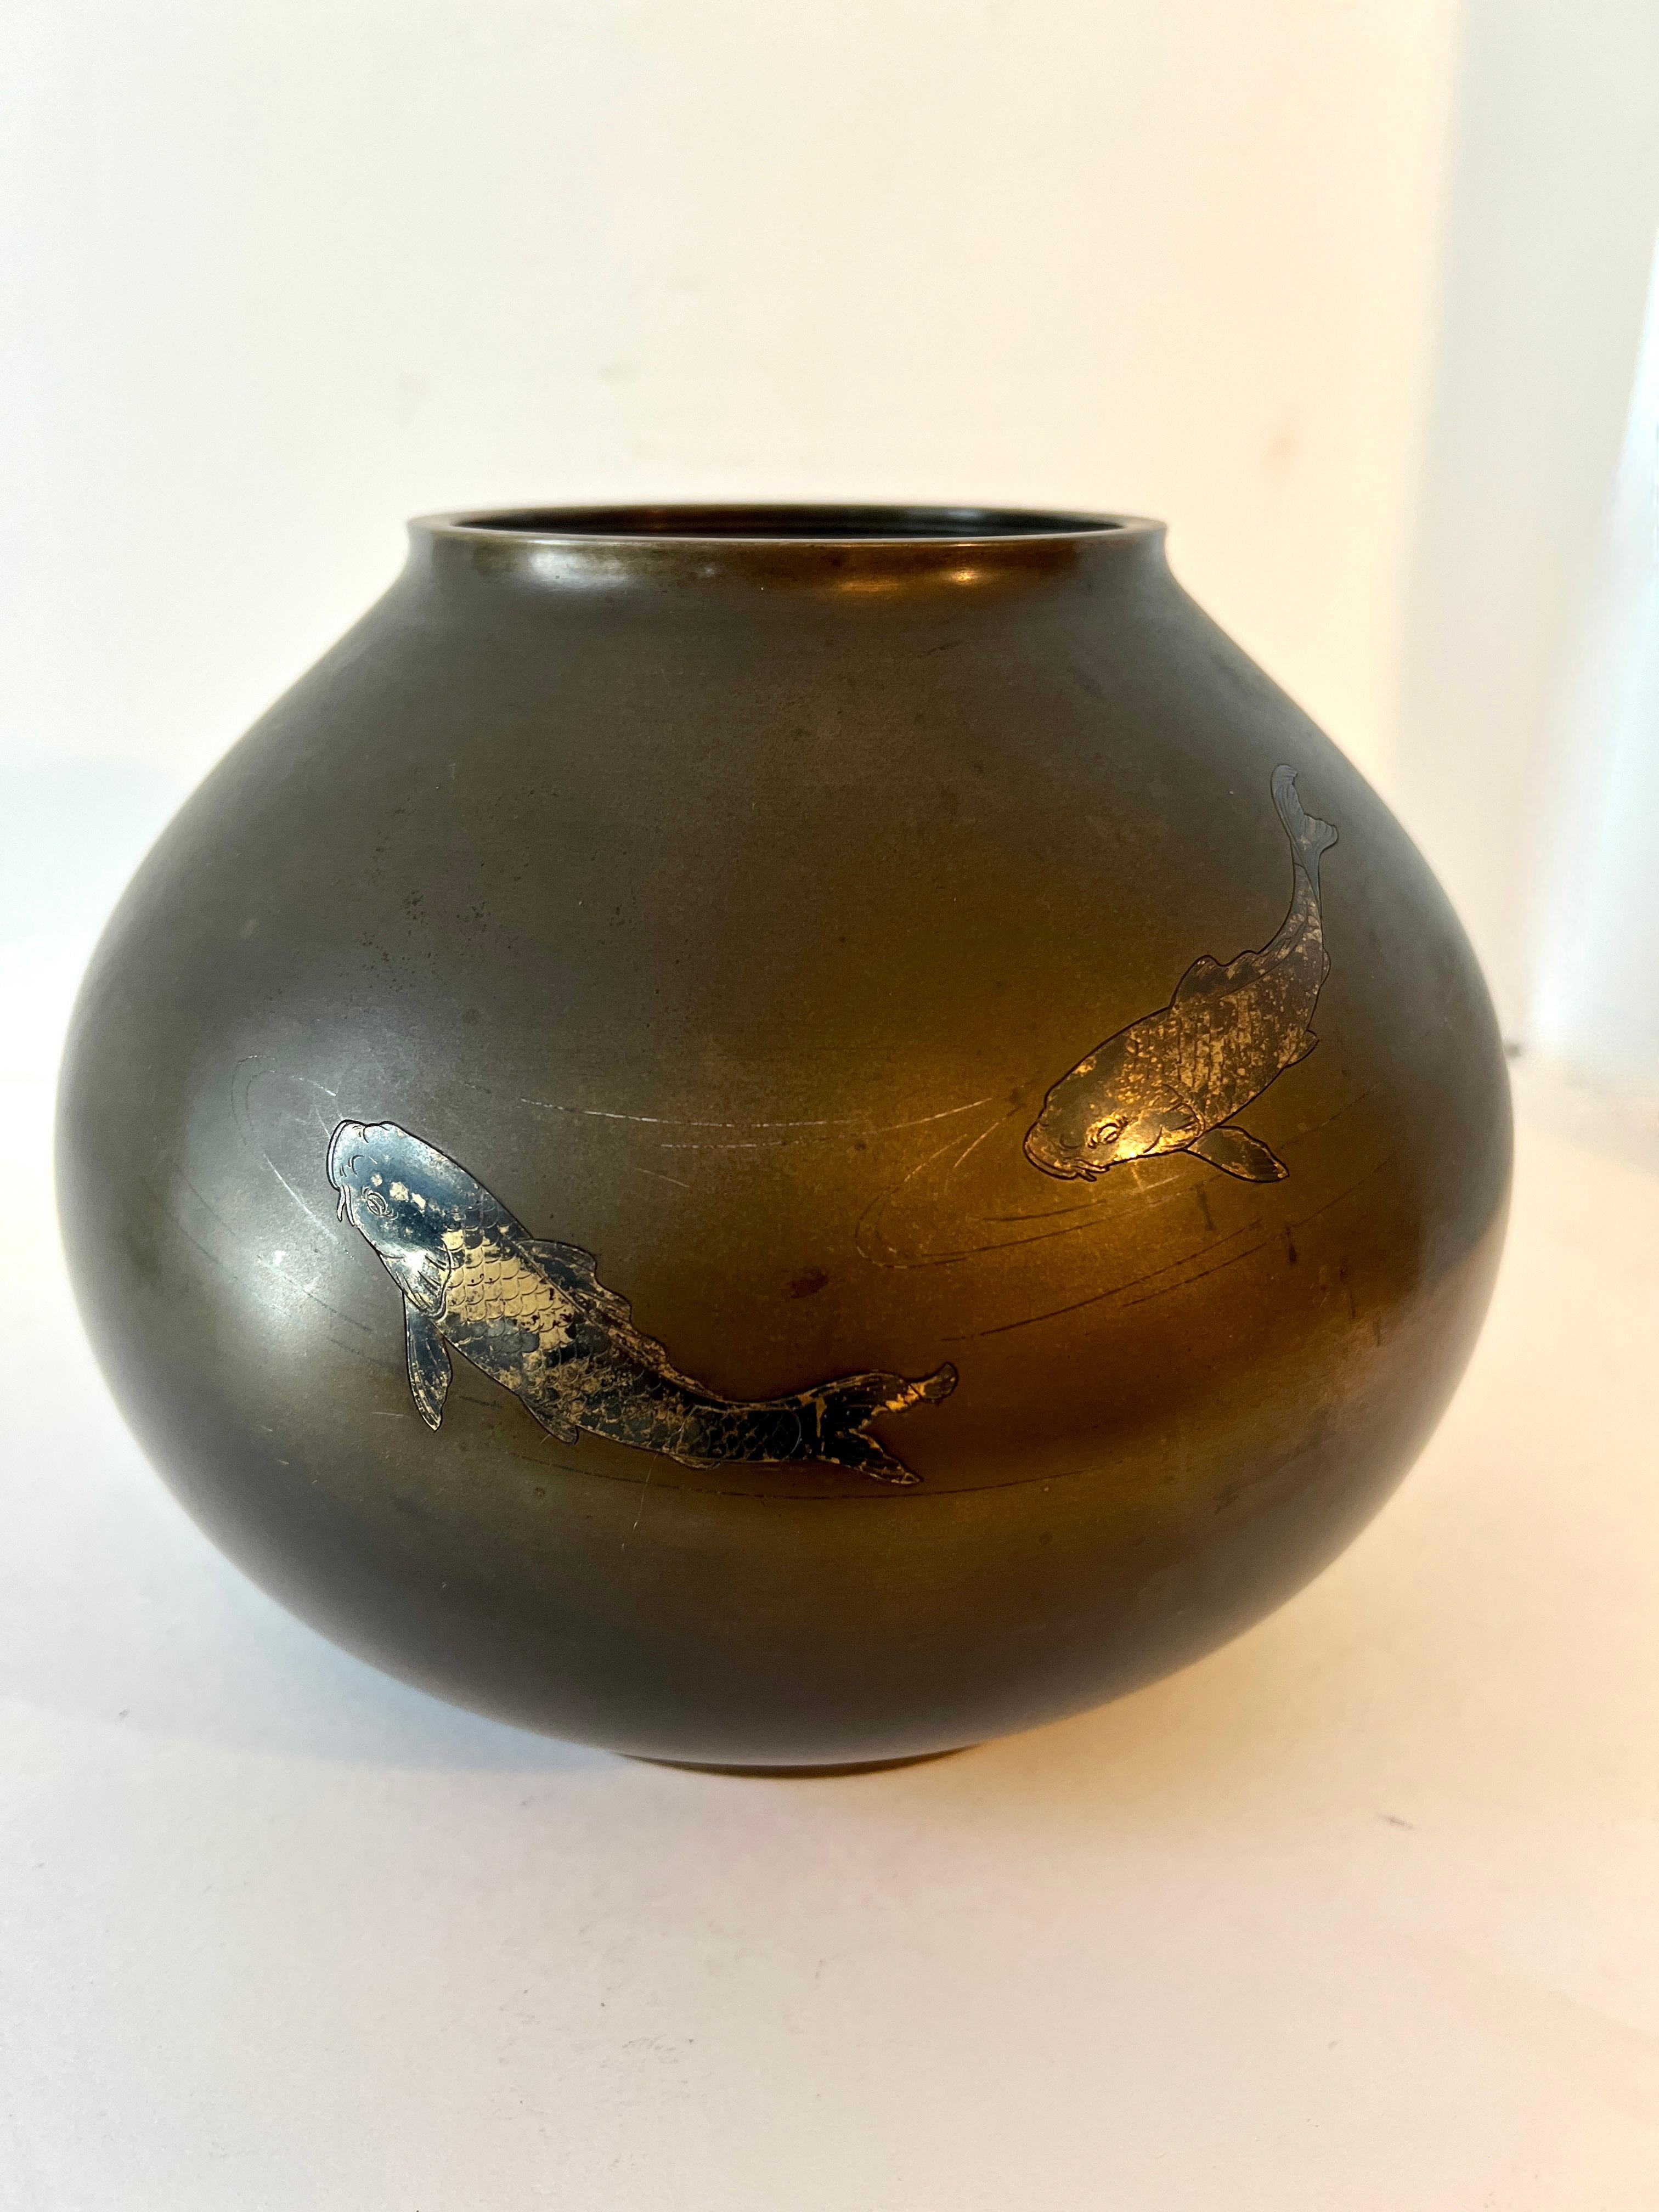 An Exceptional Spherical Asian Vase with Etched Silver inlay Koi Fish, surrounded by graceful and minimalistic wisps of water.

The piece is a Perfectly Patinated heavy bronze Vase with line Etchings and a pair of inlay Silver Koi Fish.

A perfectly